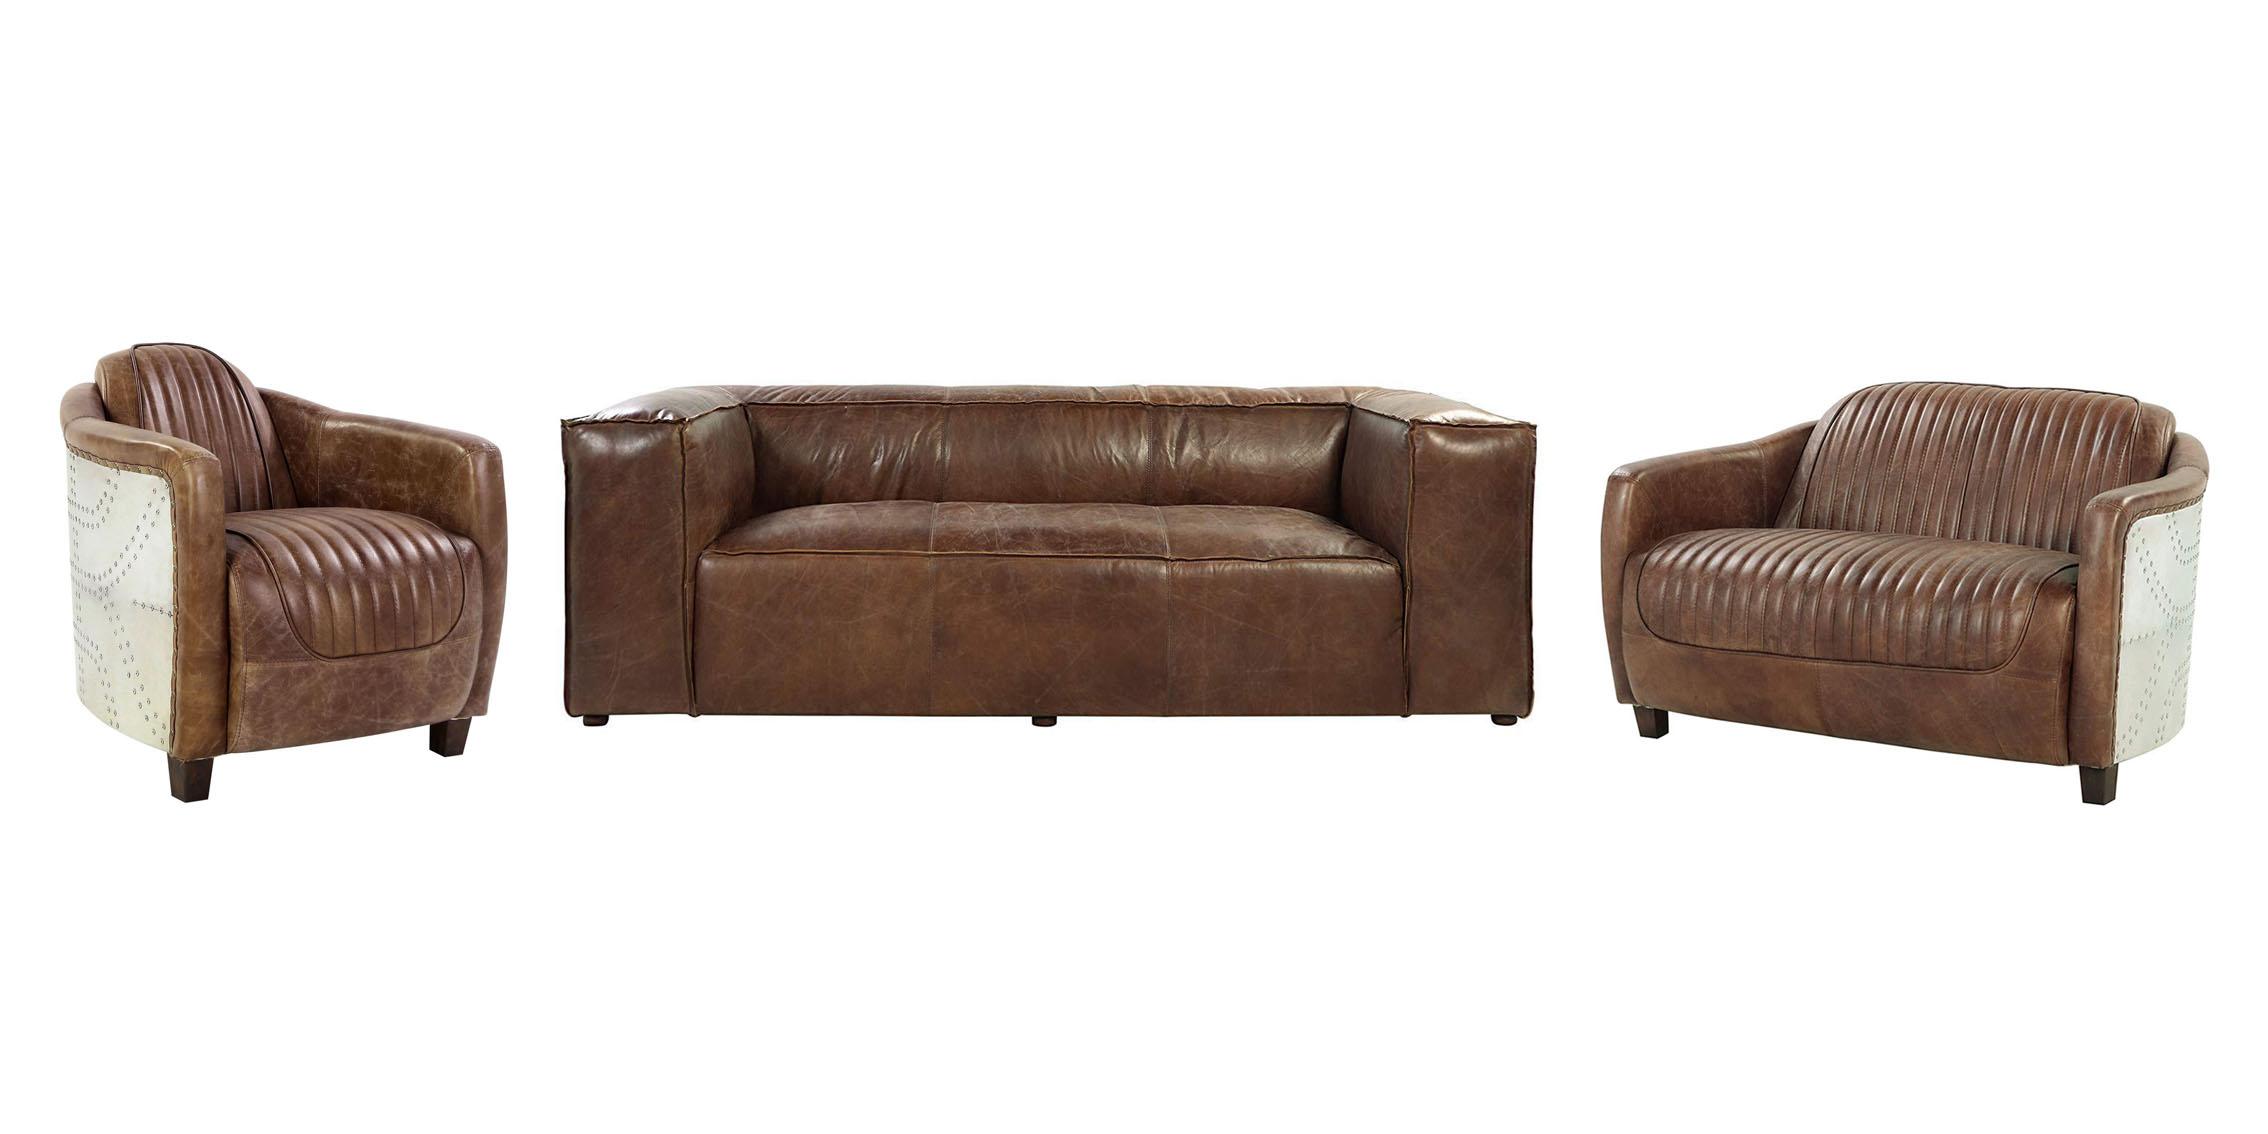 Casual Sofa Loveseat and Chair Set Brancaster 53545 53545-3PC in Brown Geniune Leather